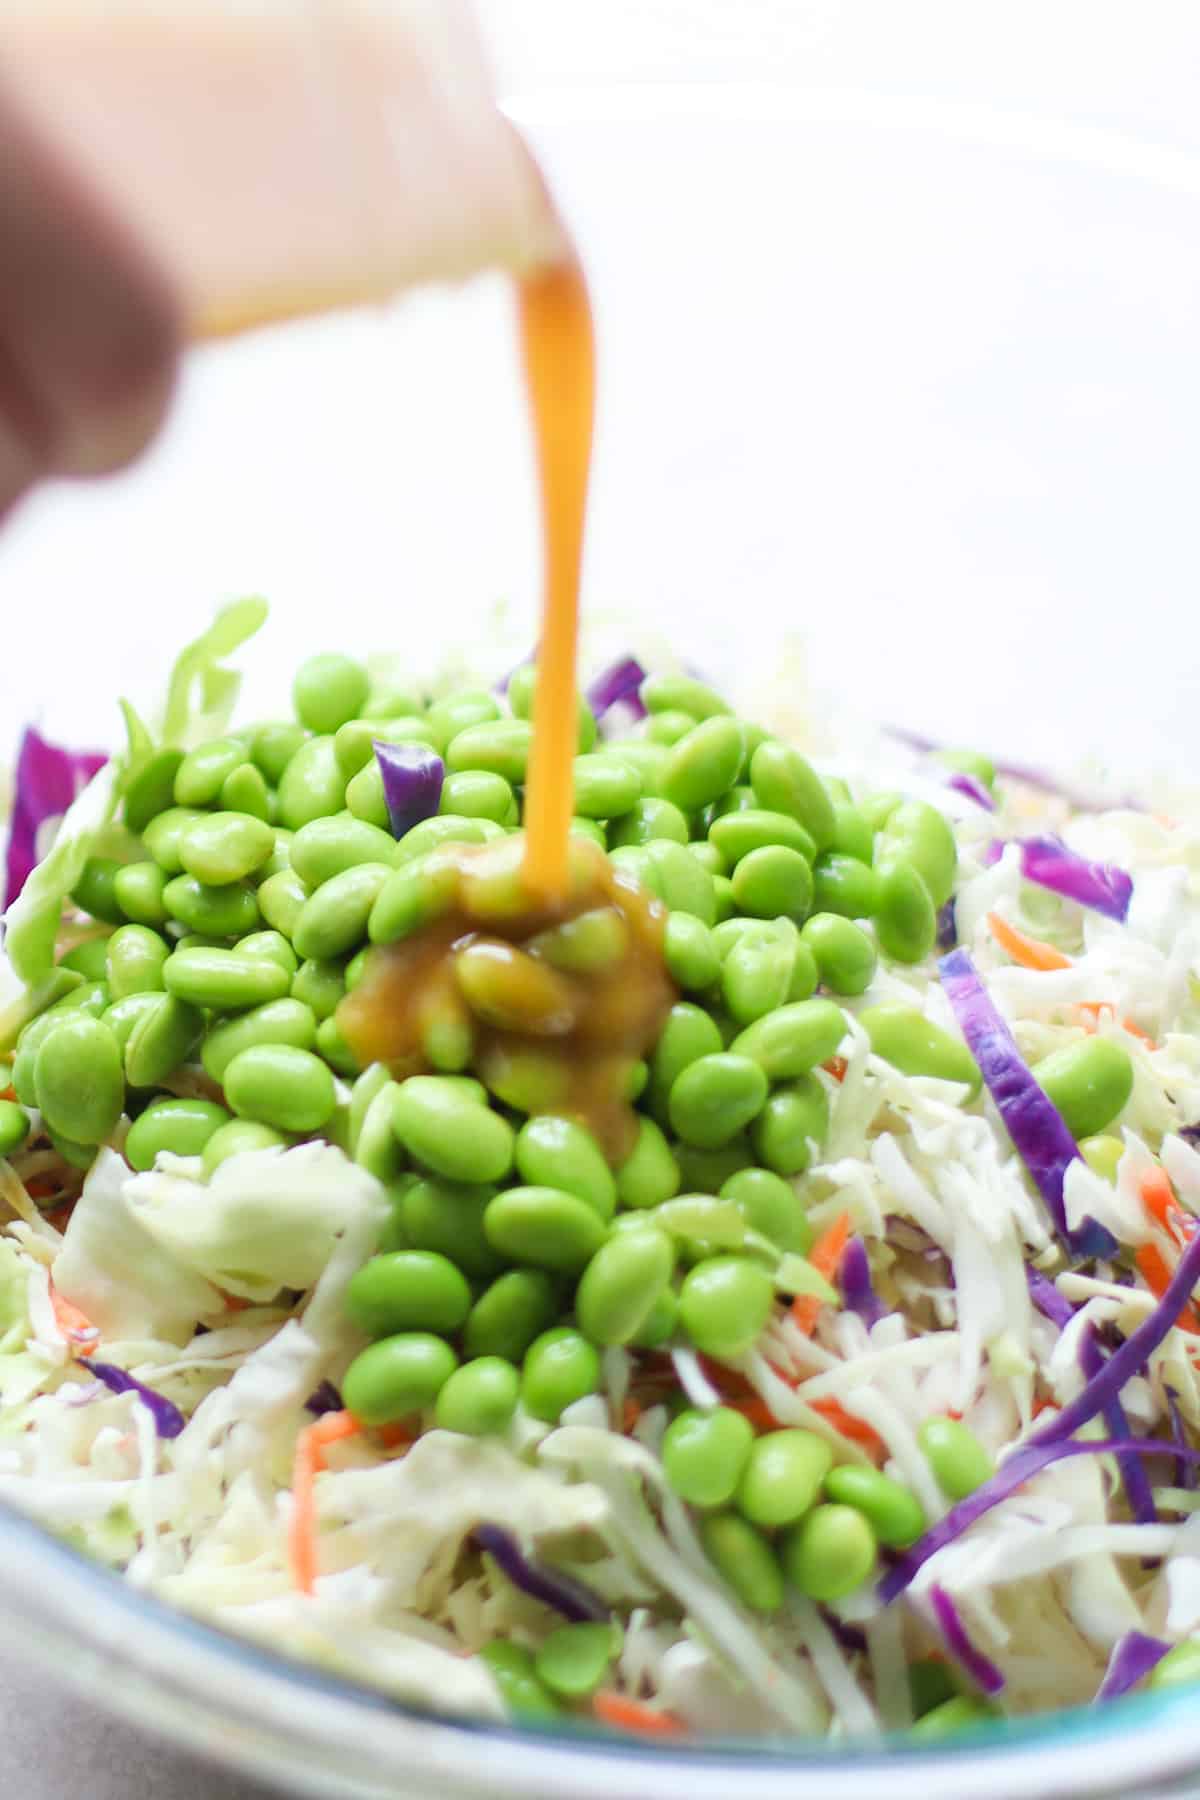 Dressing being poured over cabbage salad with edamame.